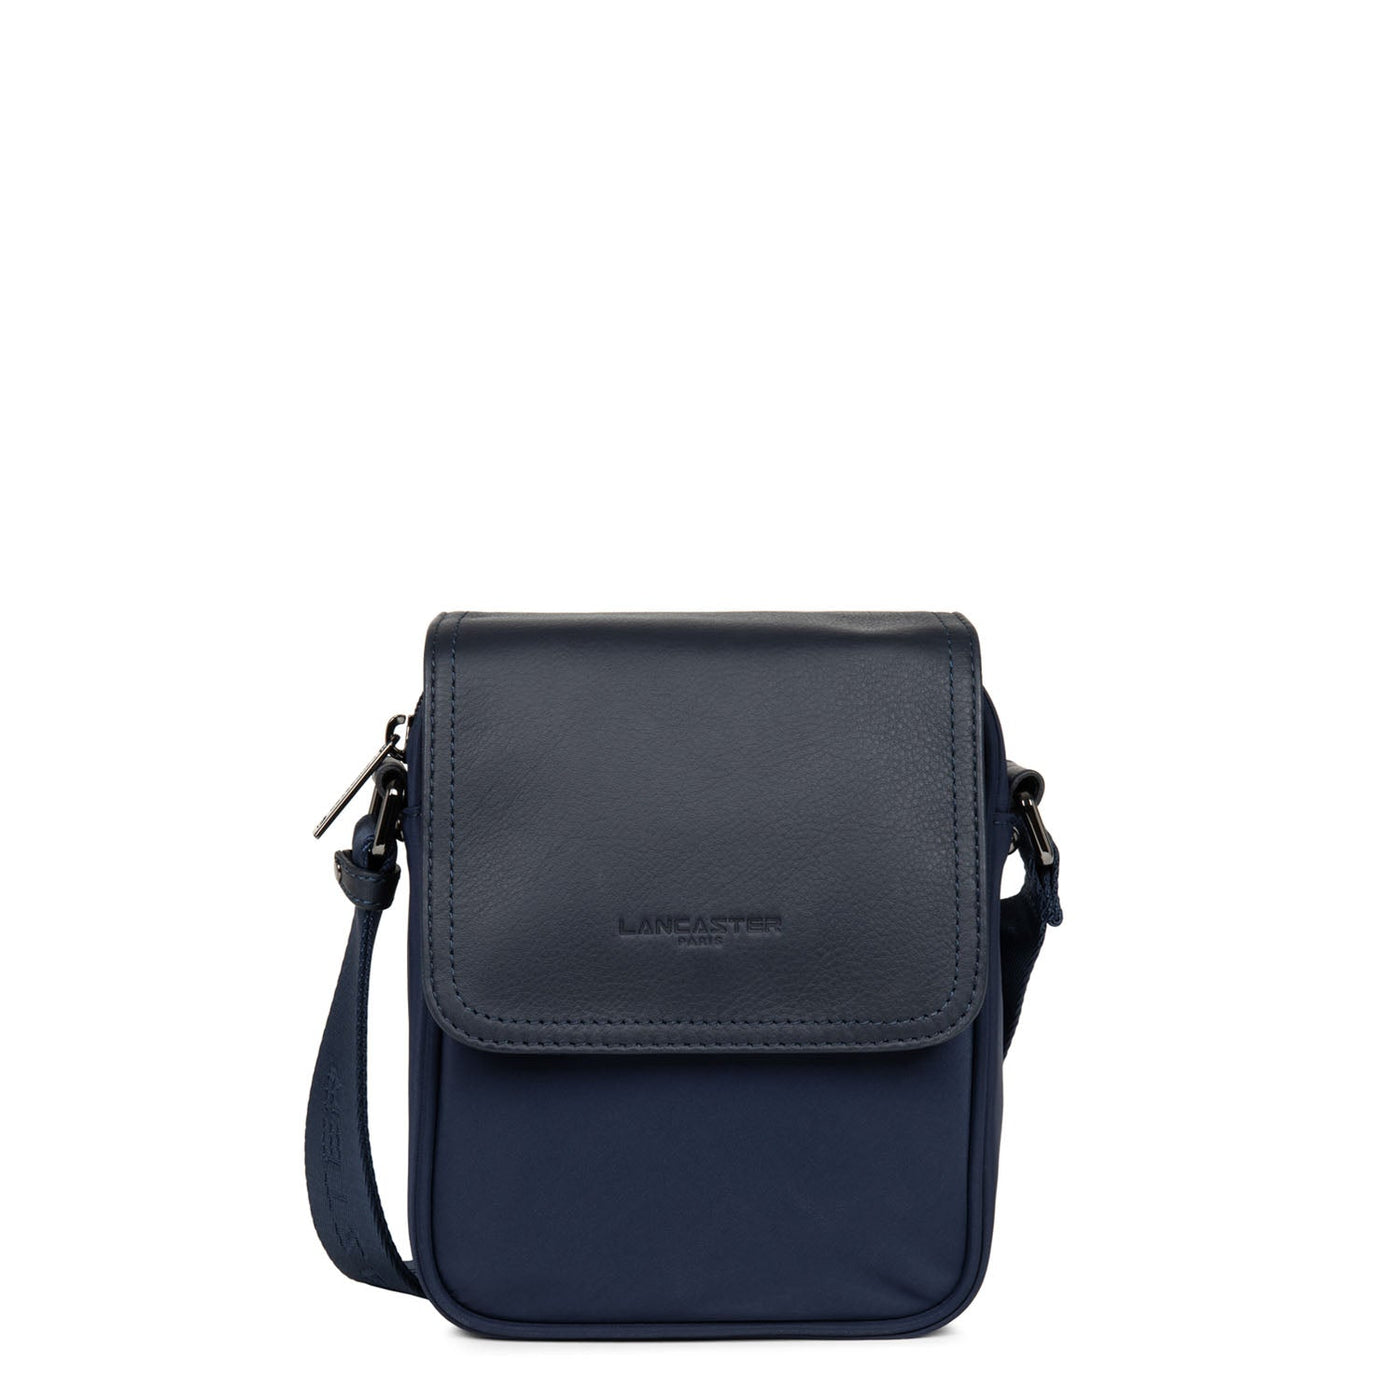 10 Stylish Types Of Bags For Men | Guide To Must-Have Bags For Men -  Bewakoof Blog